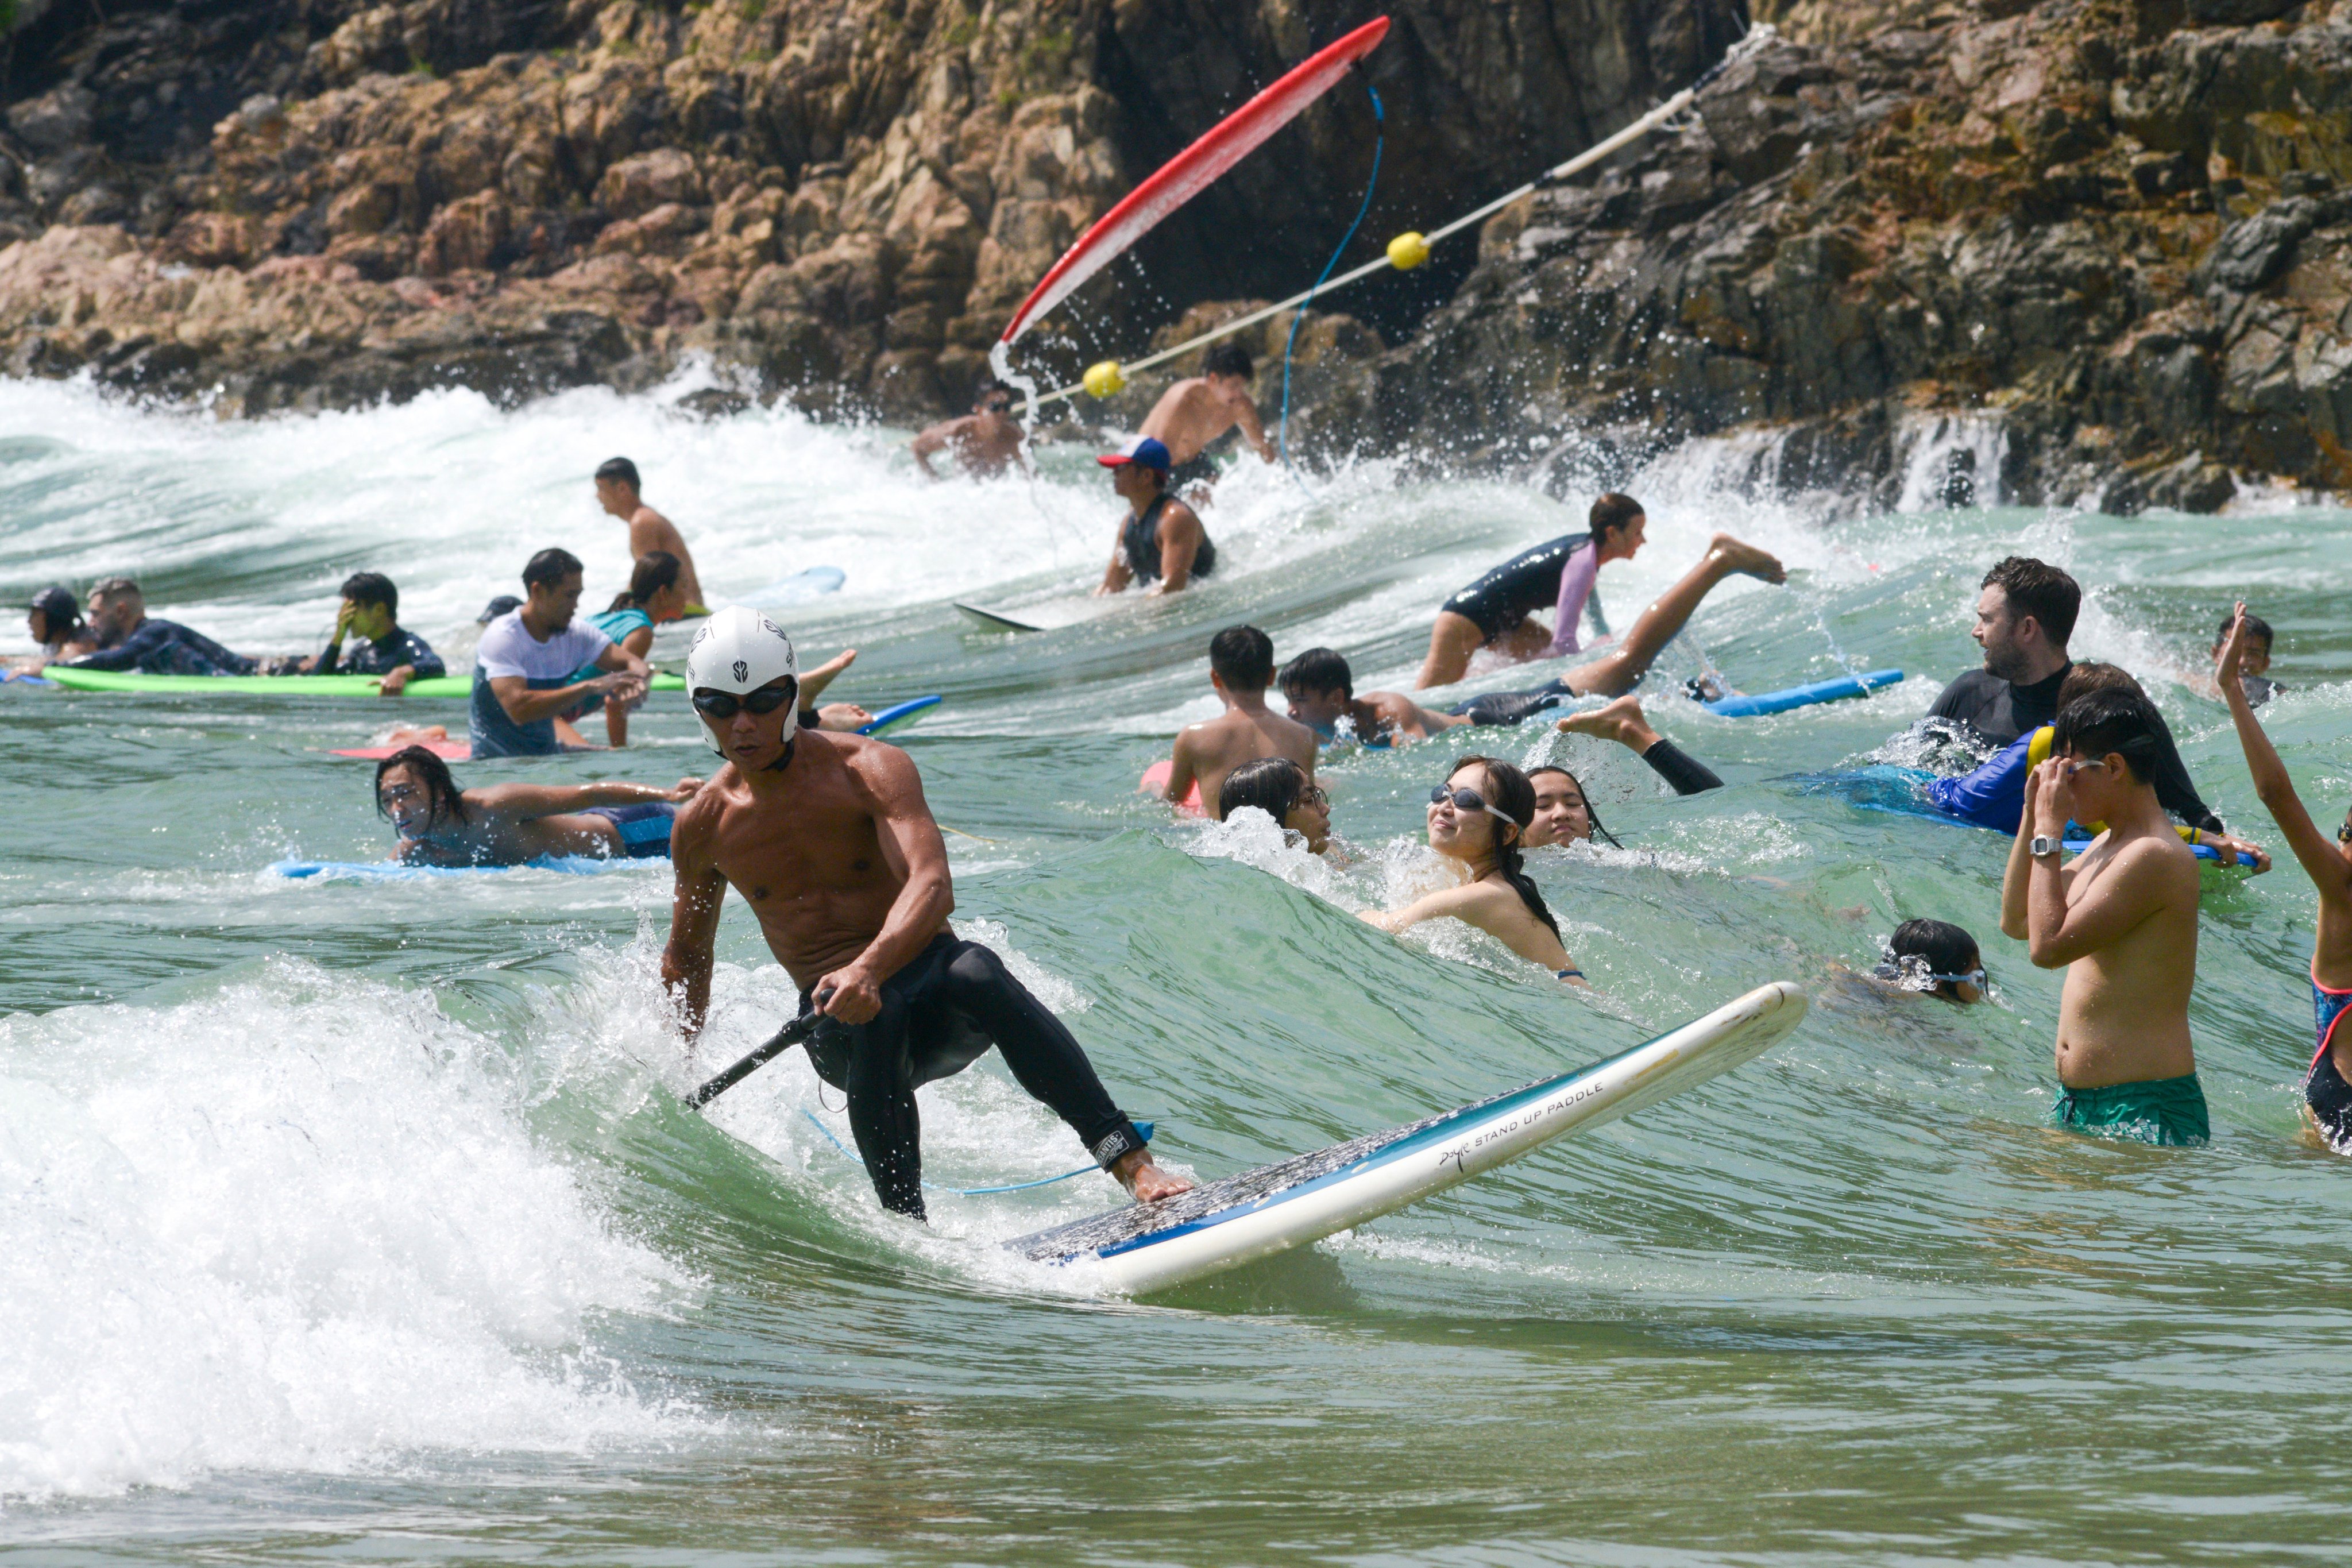 People enjoy the sun and surf at Big Wave Bay, Hong Kong, on October 9, 2022. There has been an explosion in the use of water sports equipment such as surfboards, canoes, stand-up paddle boards, and sailing and rowing boats. Photo: Antony Dickson